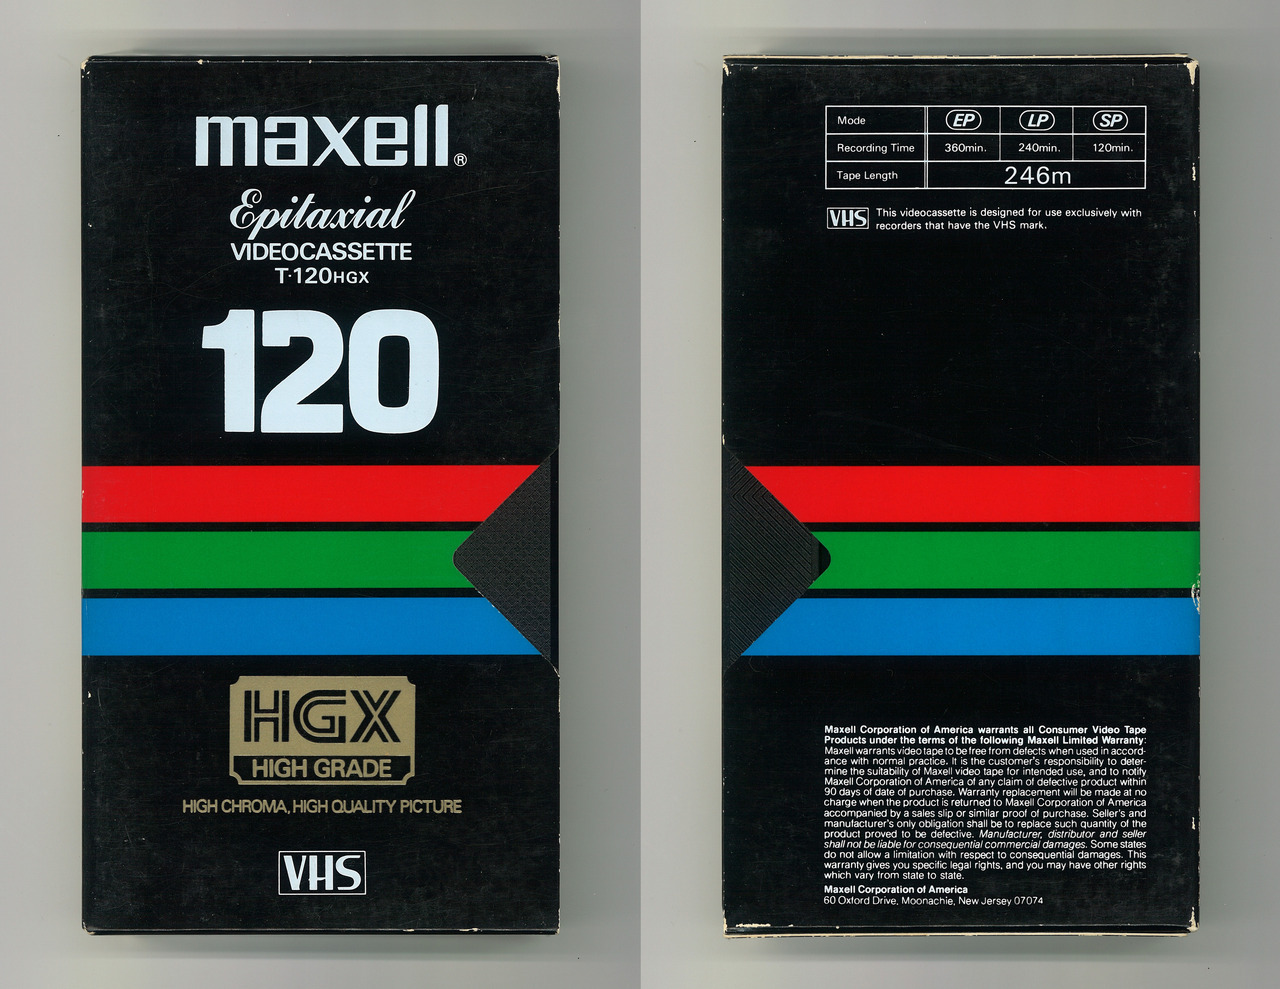 VAULT OF VHS — Maxell Epitaxial VIDEOCASSETTE T-120 HGX 120 VHS